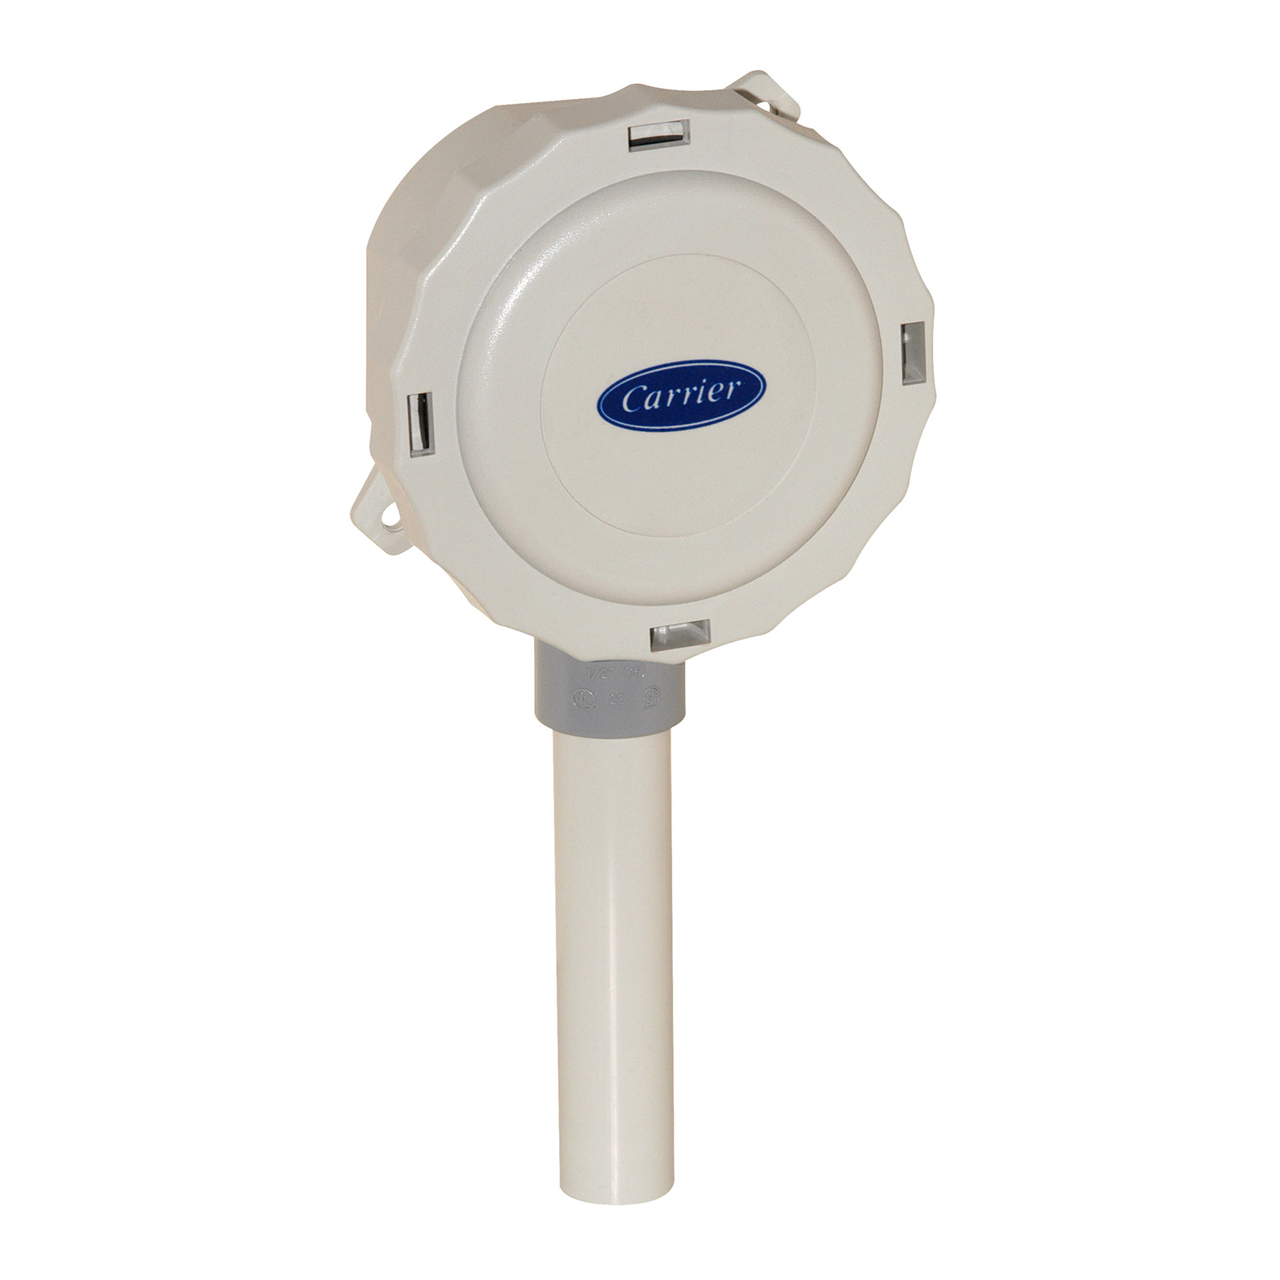 Carrier HL39ZZ005 33ZCSENDRH-02 duct mounted HVAC relative humidity sensor 